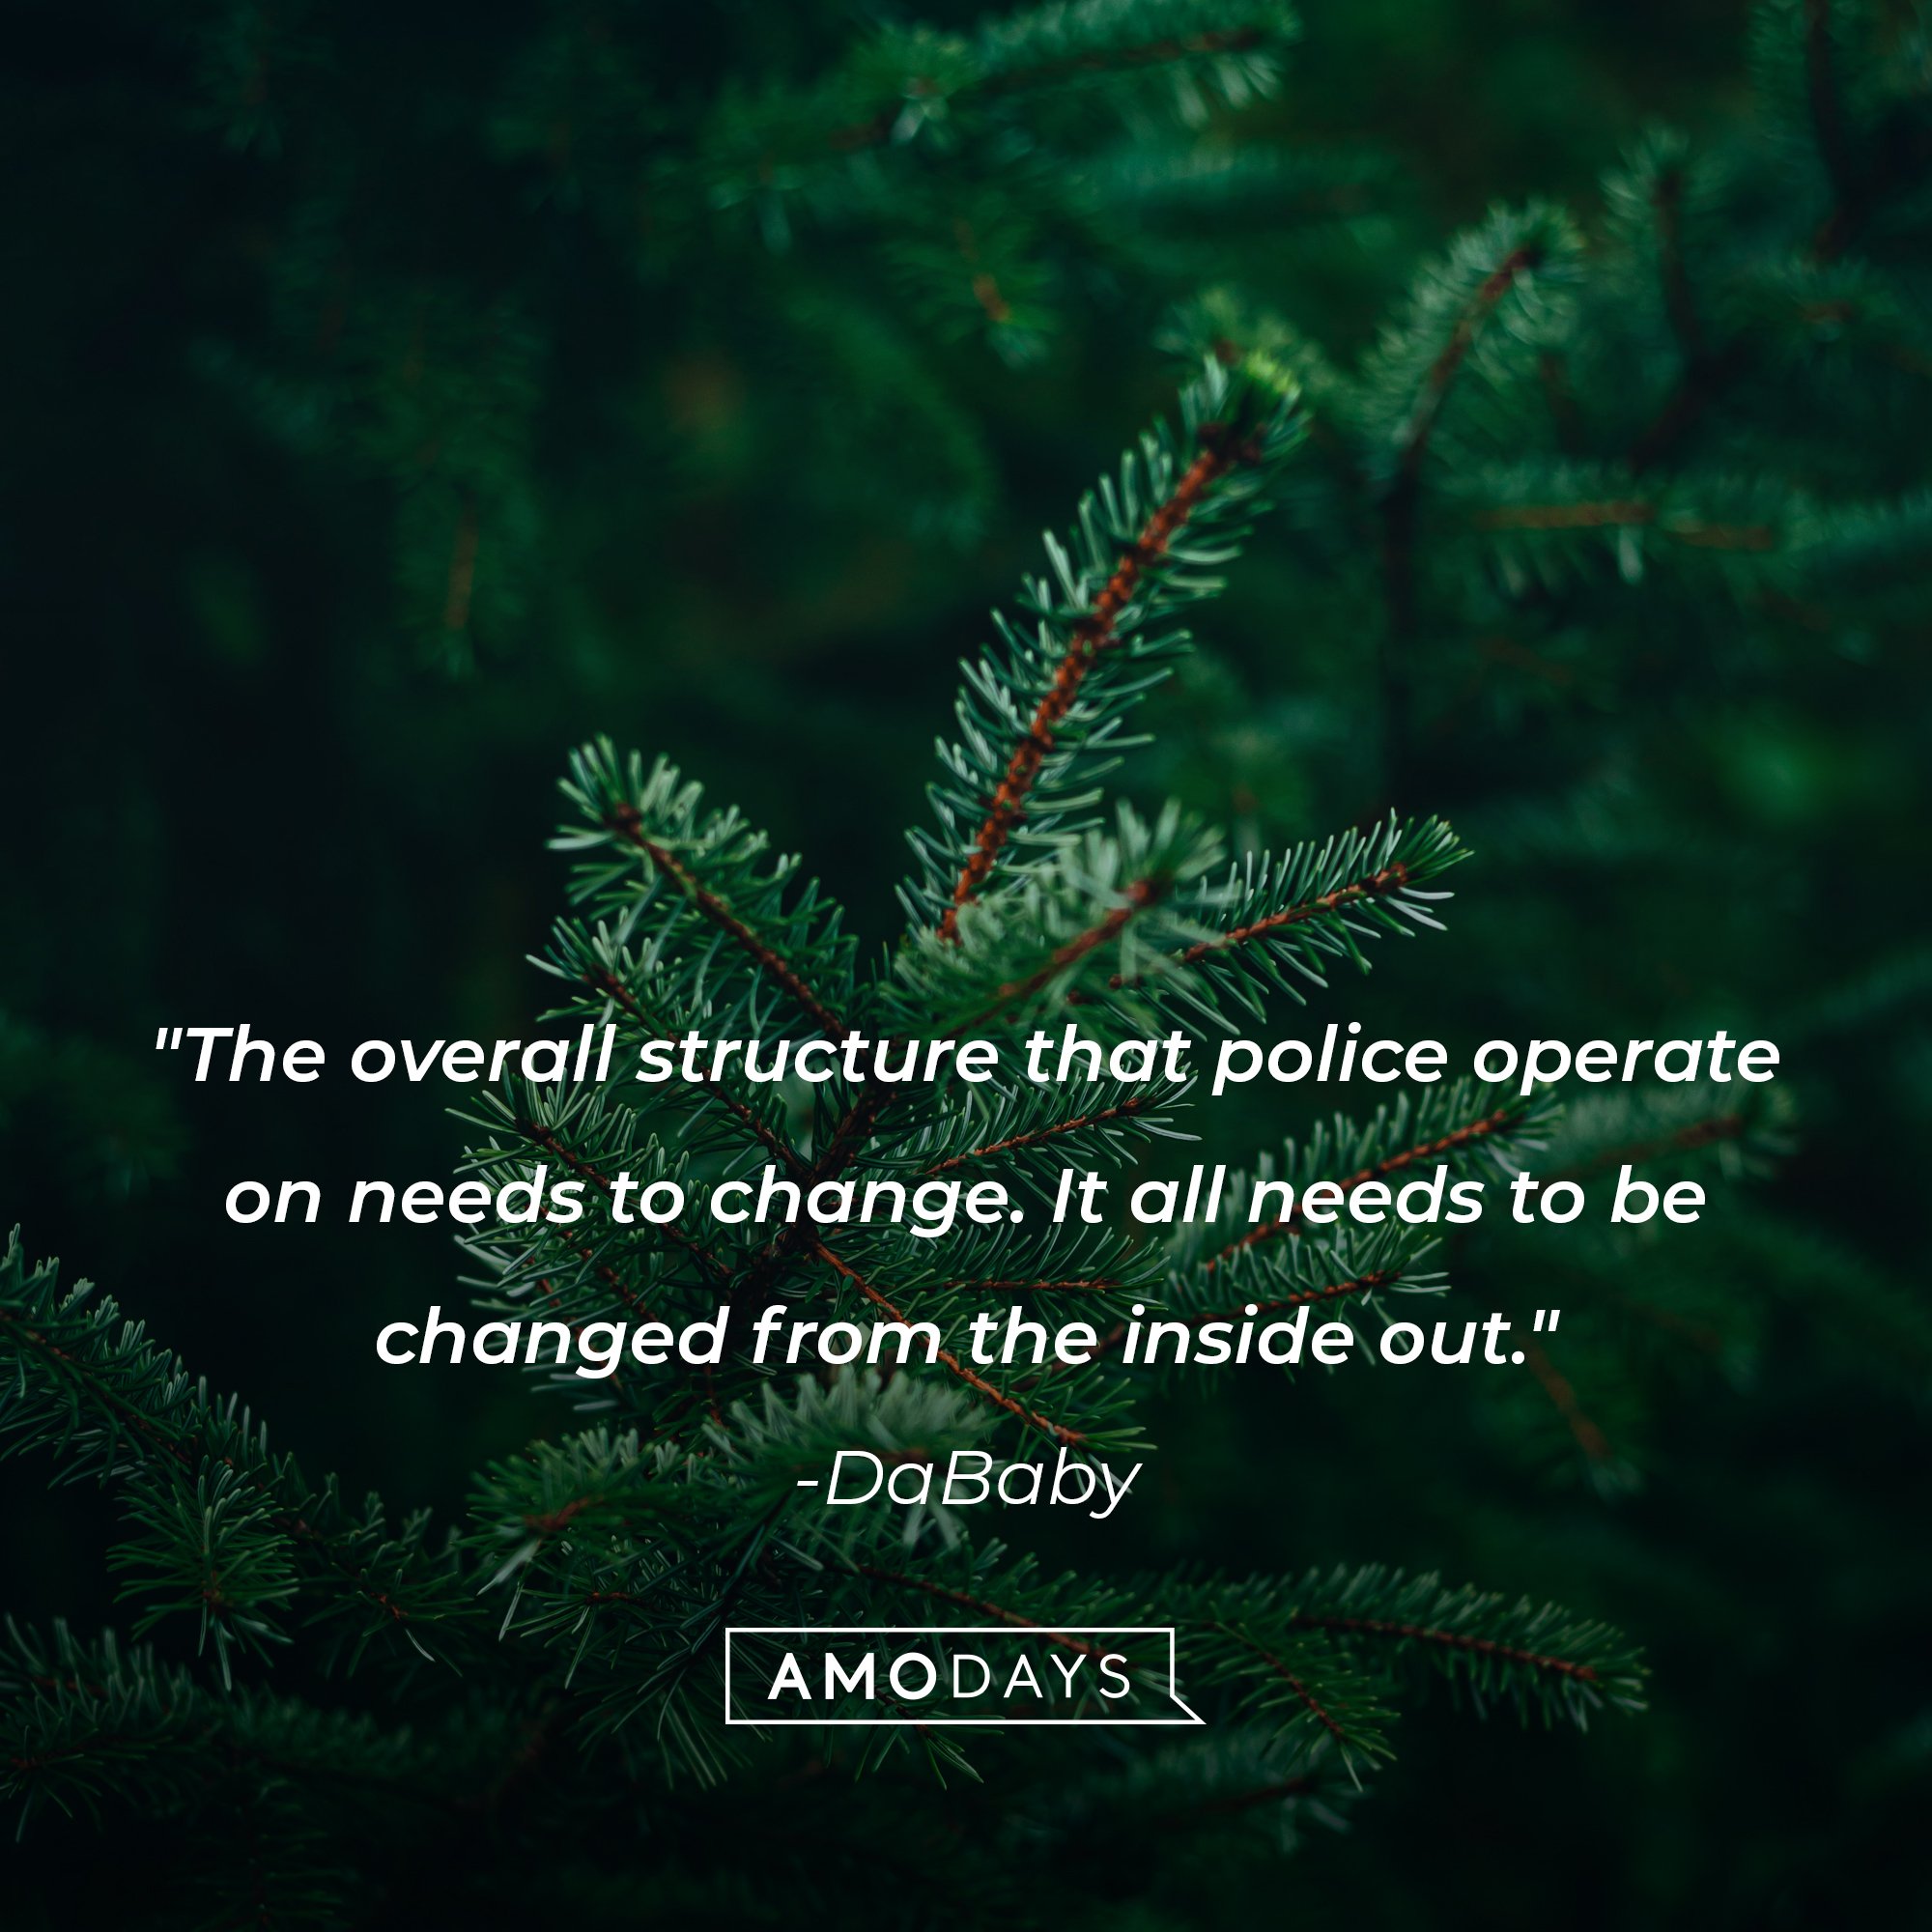 DaBaby‘s quote: "The overall structure that police operate on needs to change. It all needs to be changed from the inside out." | Image: AmoDays